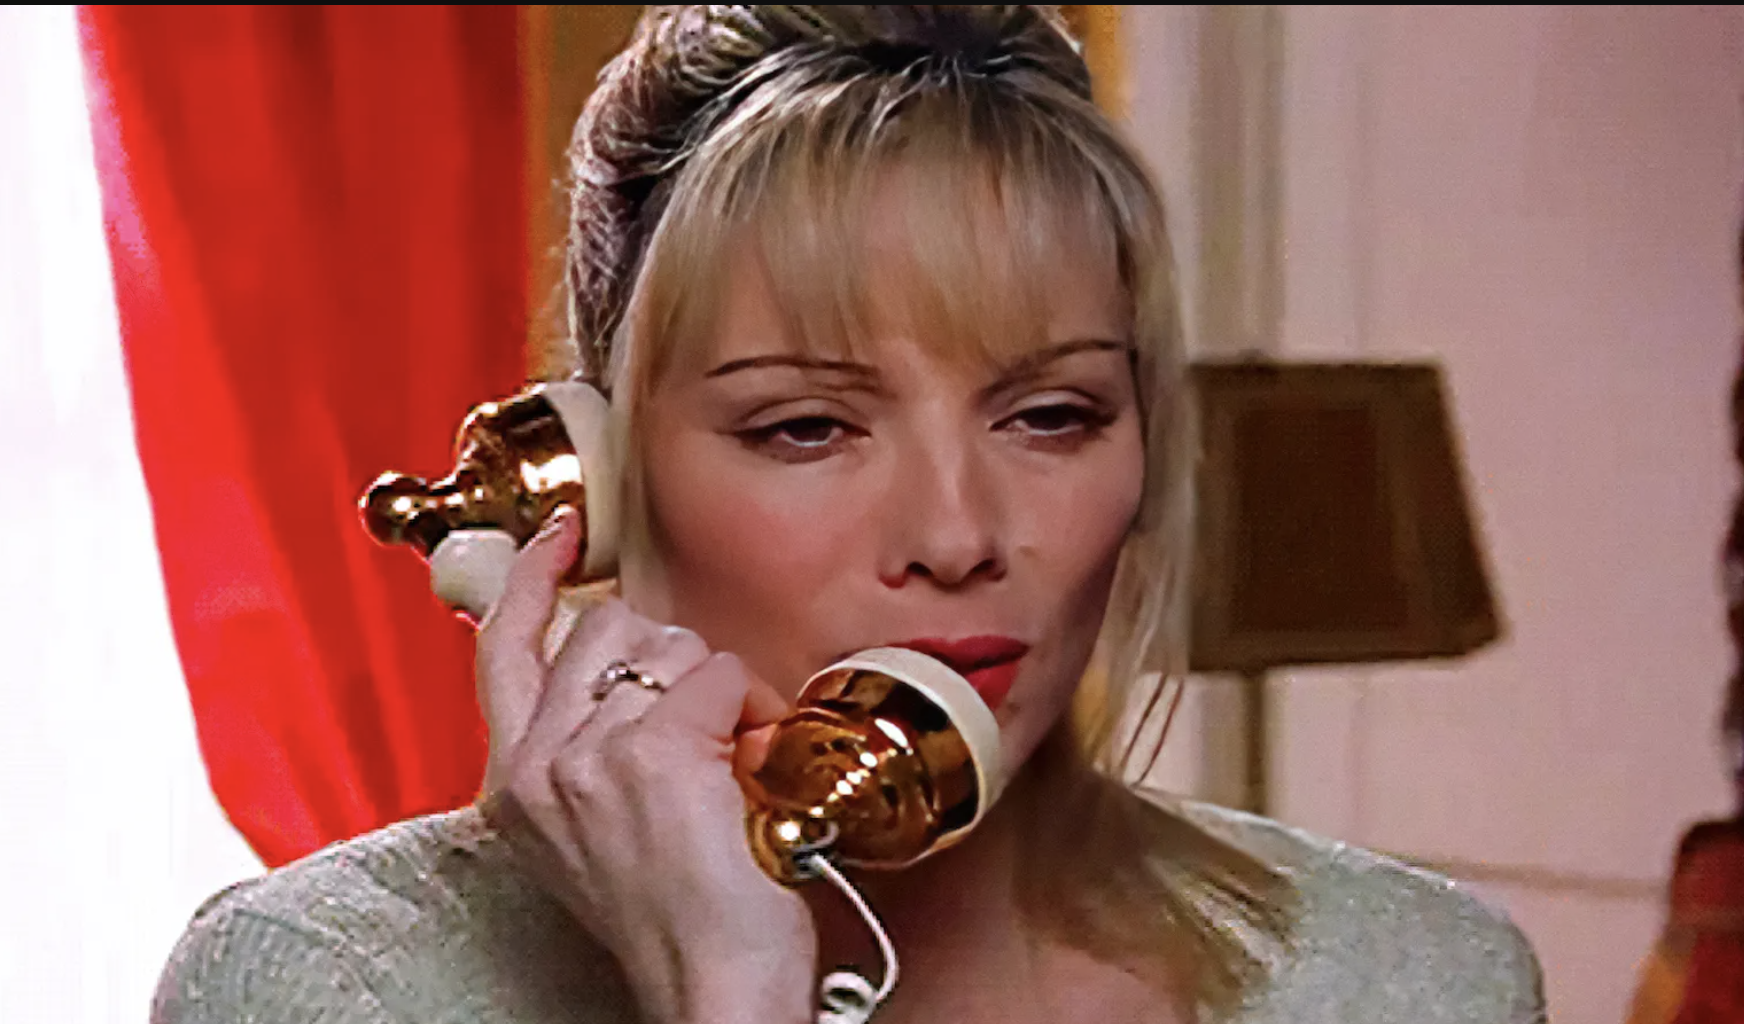 Samantha from &quot;Sex and The City&quot; talking on an old-fashioned corded phone